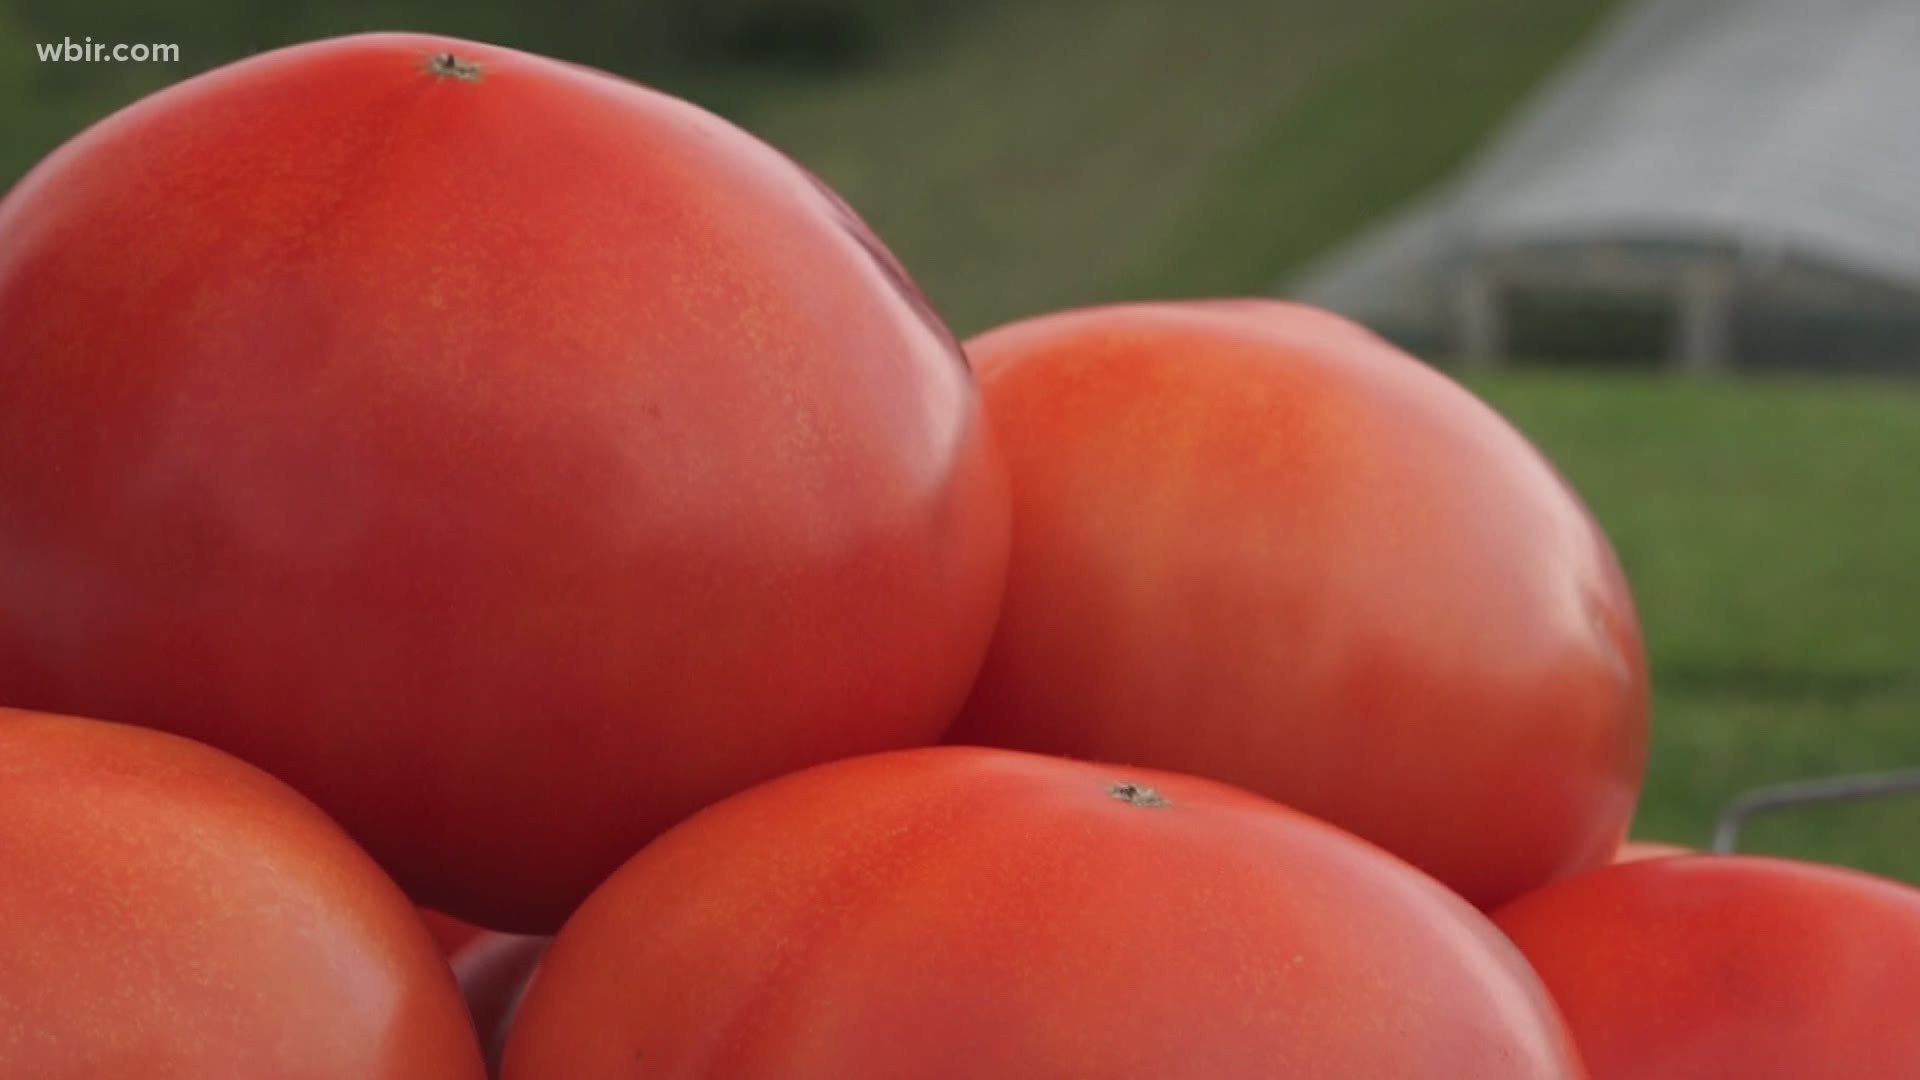 A look at why Grainger County is East Tennessee's place to find vine-ripened tomatoes. Aug. 6, 2020-4pm.